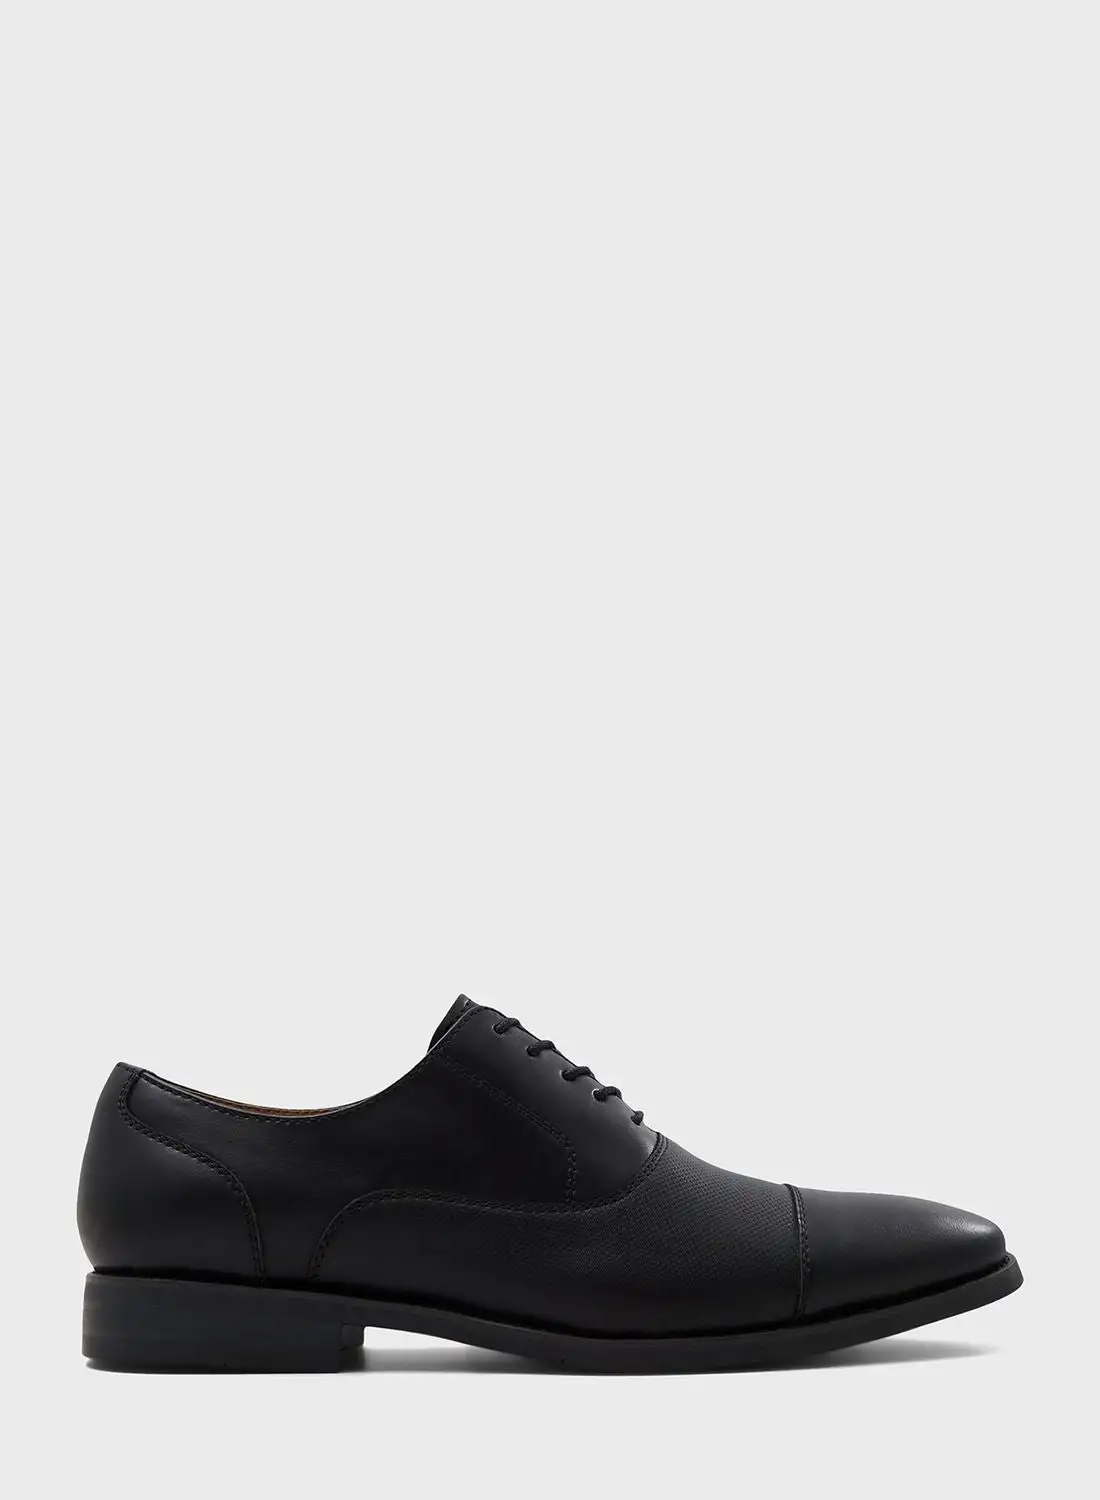 CALL IT SPRING Formal Lace Up Shoes